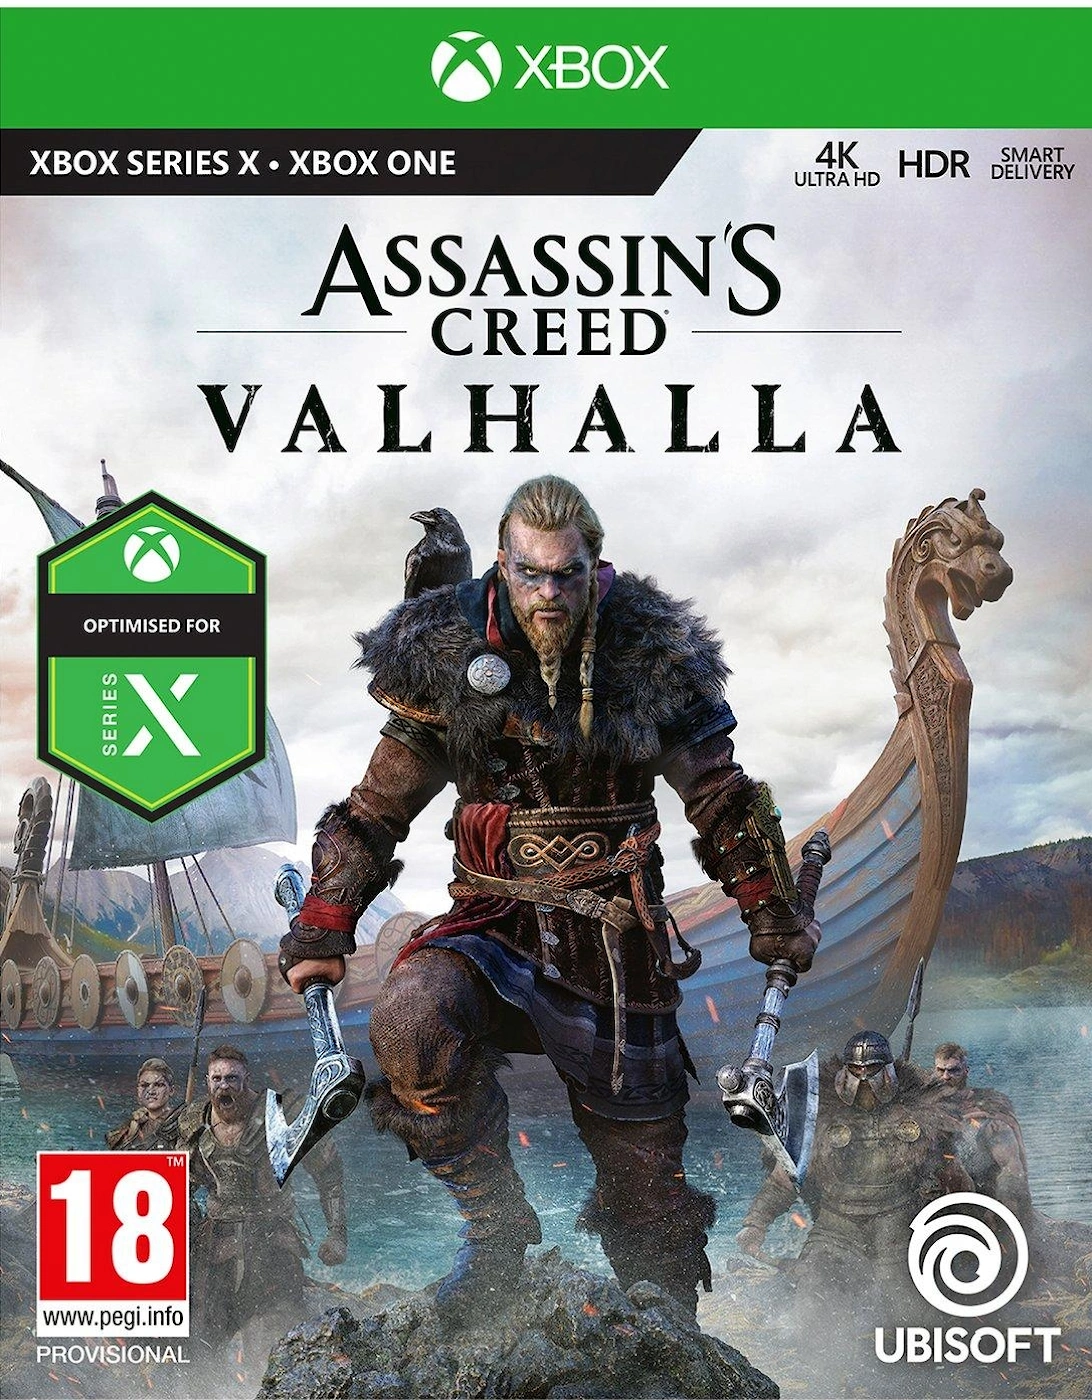 Xbox Assassin's Creed Valhalla, 3 of 2